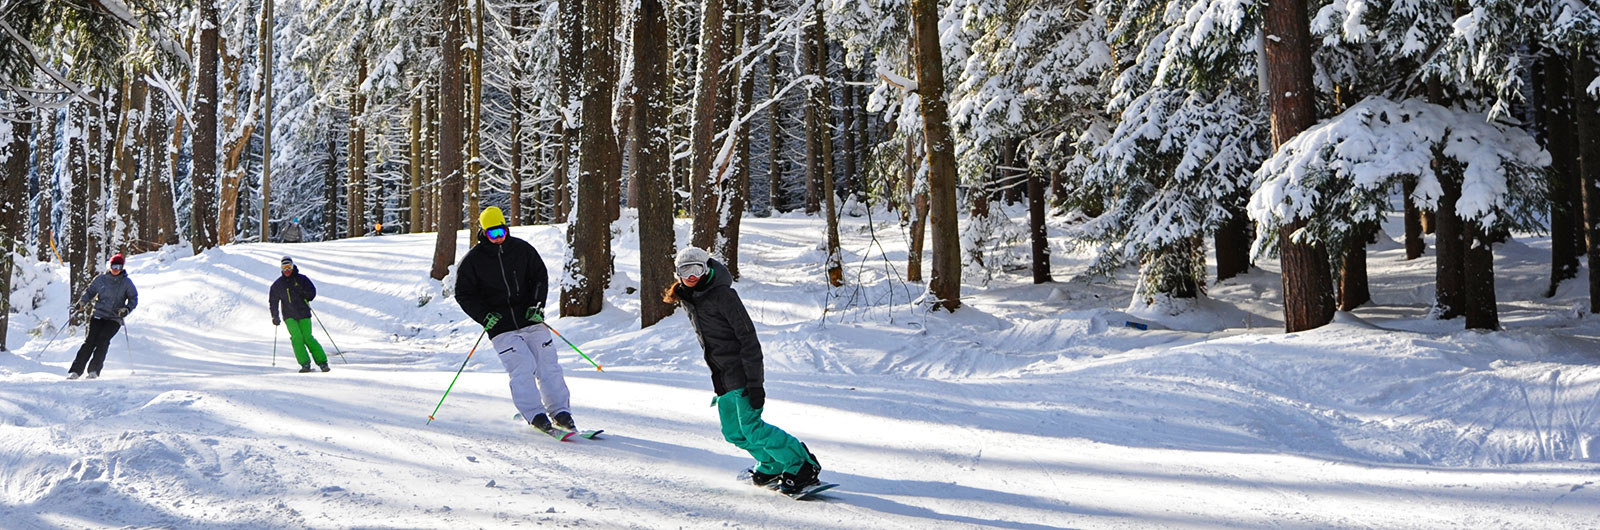 Skiers and riders on snowy Tannenbaum slope